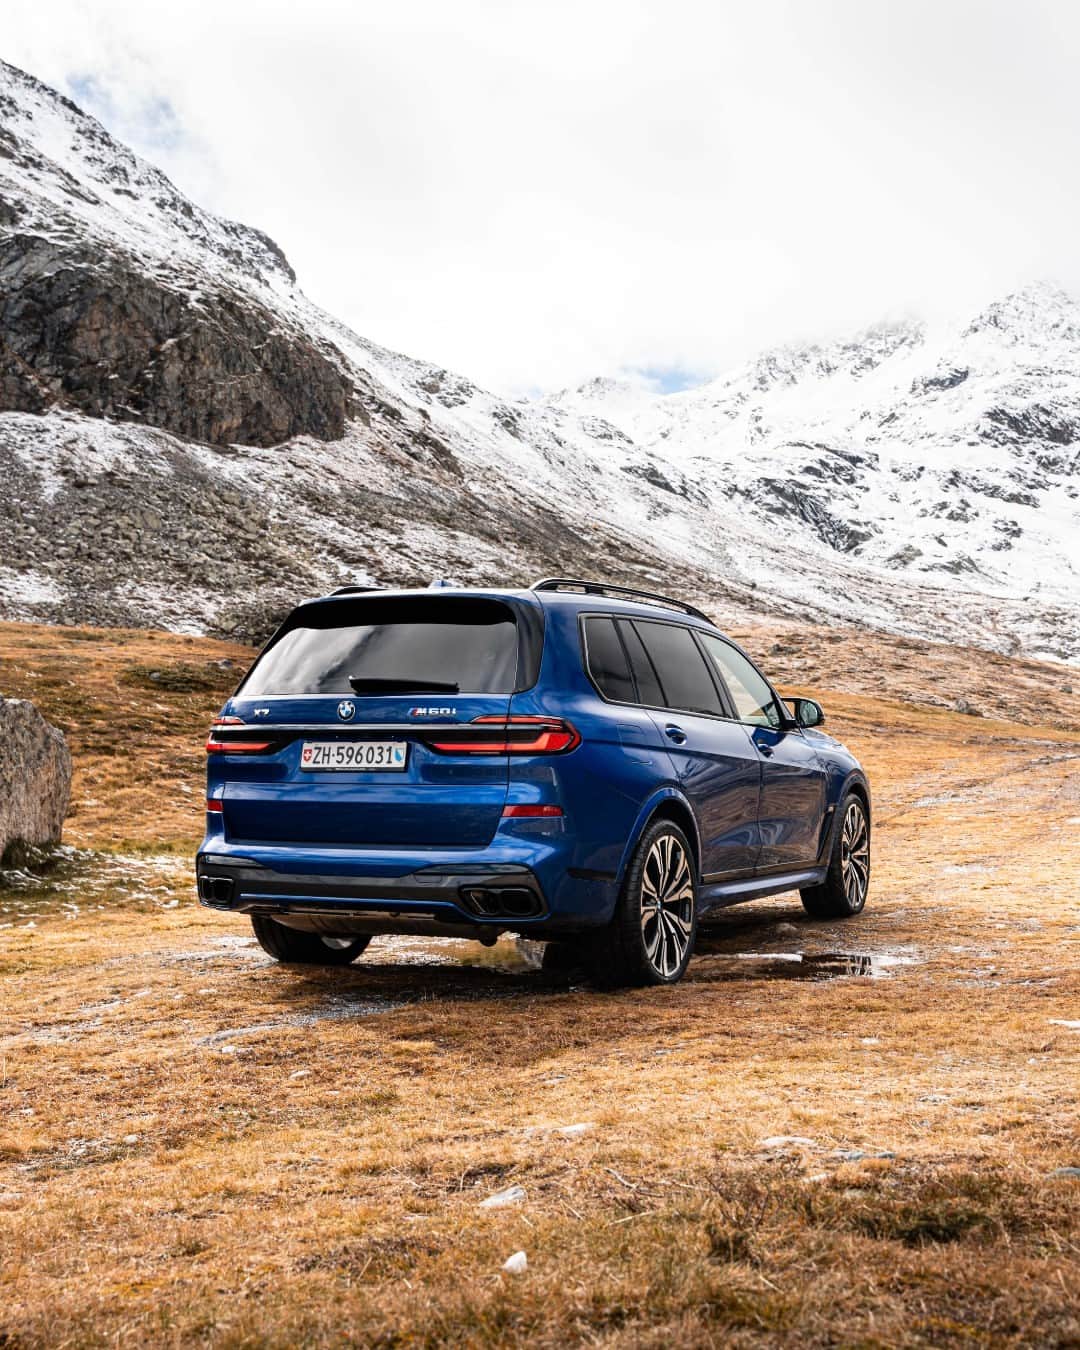 BMWのインスタグラム：「SUV + ⛰️ = Top tier fun 🤩🍁❄️ 📸: @the__thomson @bmwswitzerland #BMWRepost   The BMW X7 M60i xDrive . #THEX7 #BMW #X7 #BMWM #MPerformance __ BMW X7 M60i xDrive : Combined fuel consumption: 12.9–12.1 l/100 km. Combined CO2 emissions: 292–273 g/km. All data according to WLTP. Further info: www.bmw.com/disclaimer」